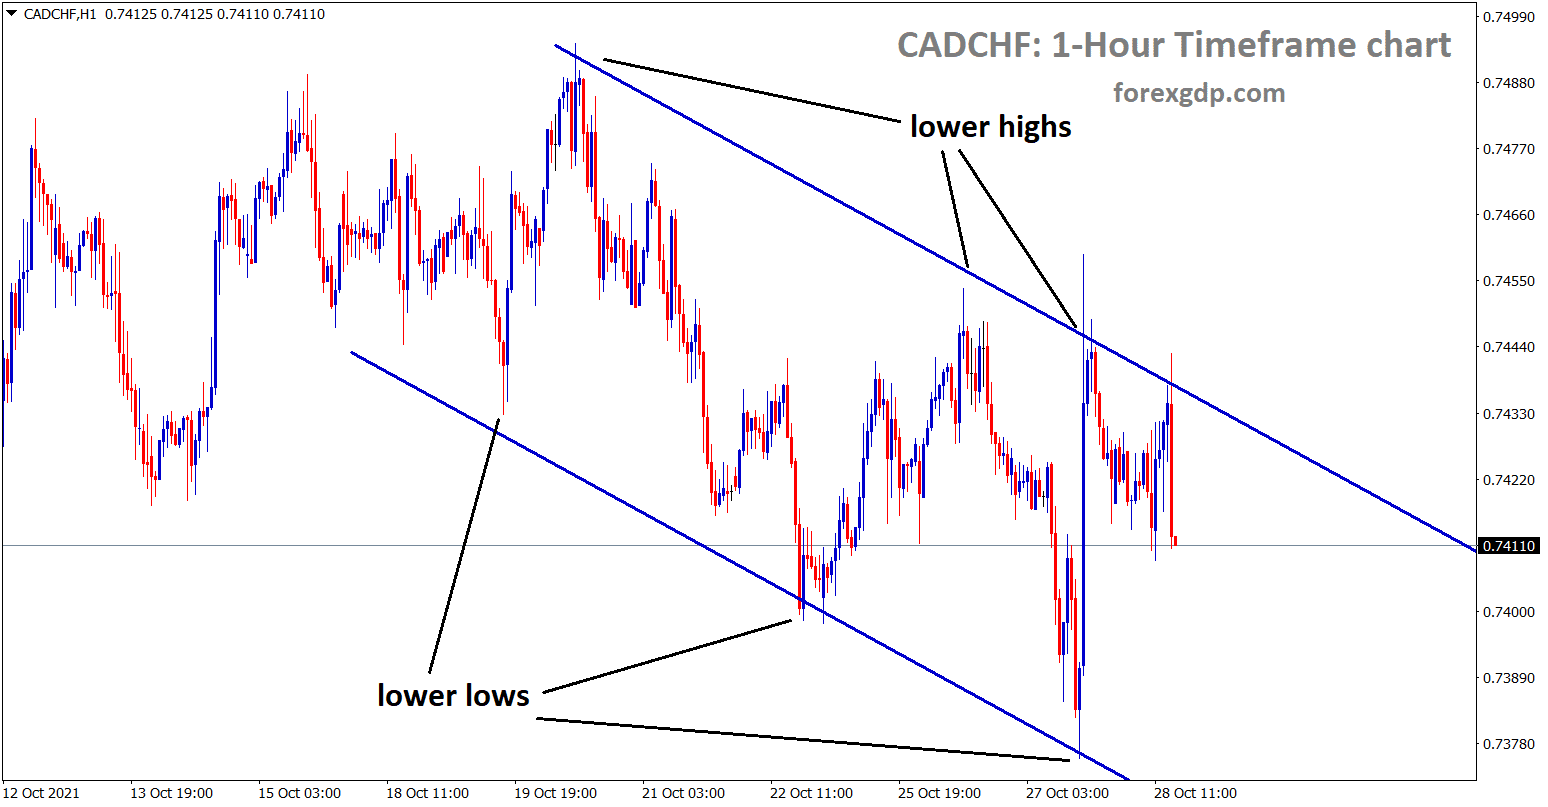 CADCHF is moving in a descending channel and falling now from the lower high area of the descending channel line